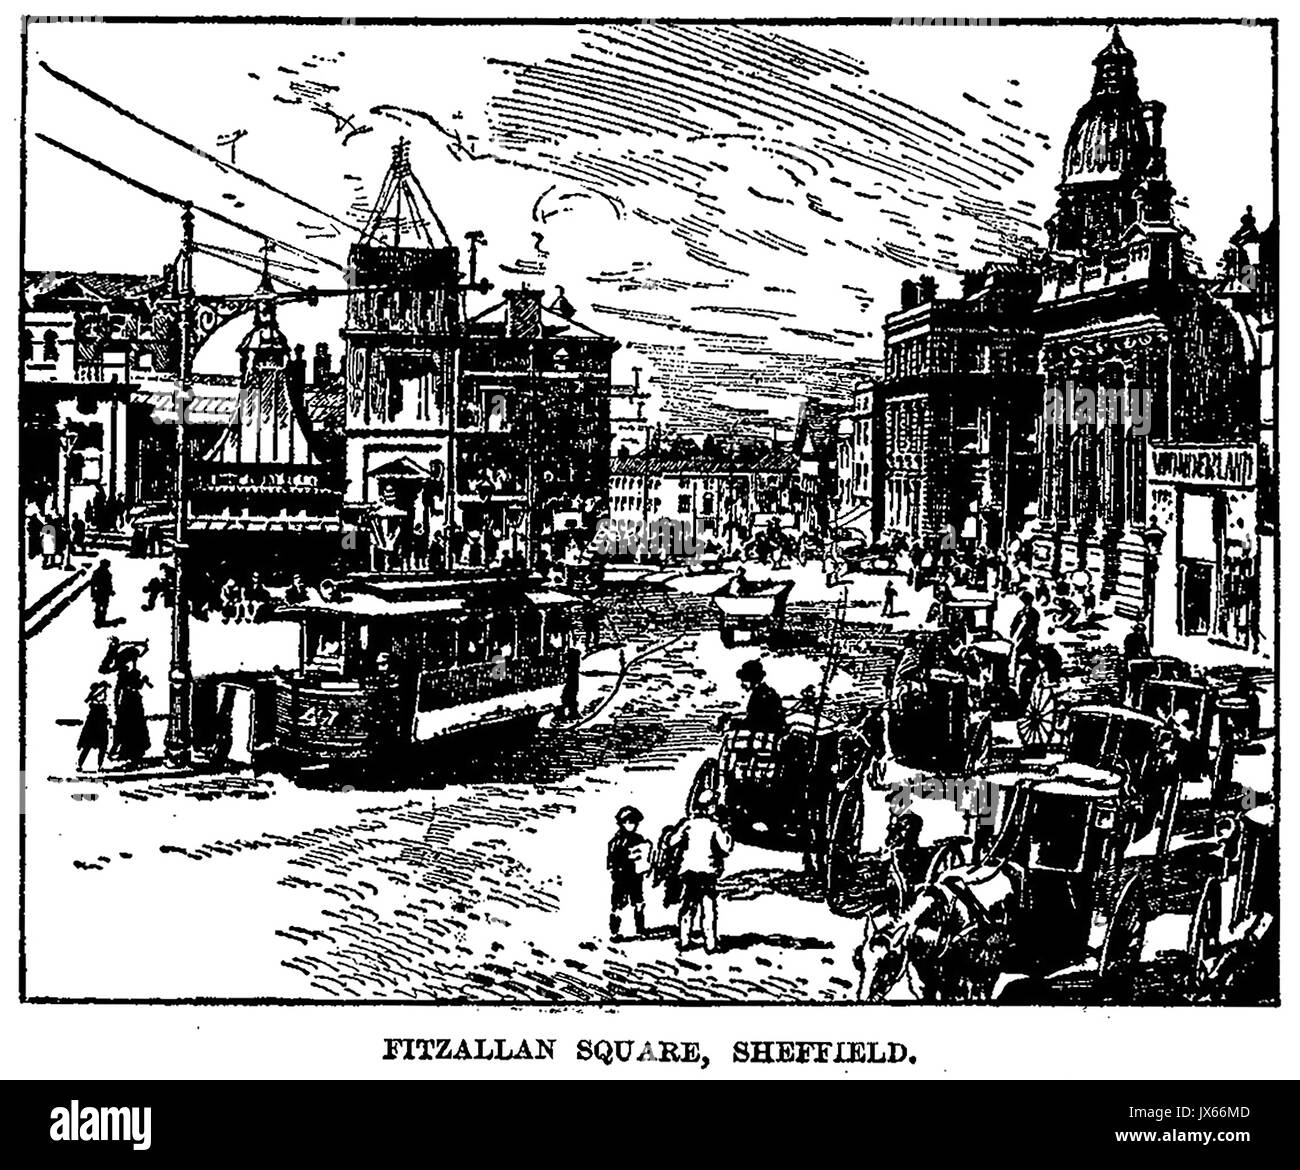 Fitzalen Square, Sheffield in 1920 with original tram system & horse and cart carriage transport Stock Photo